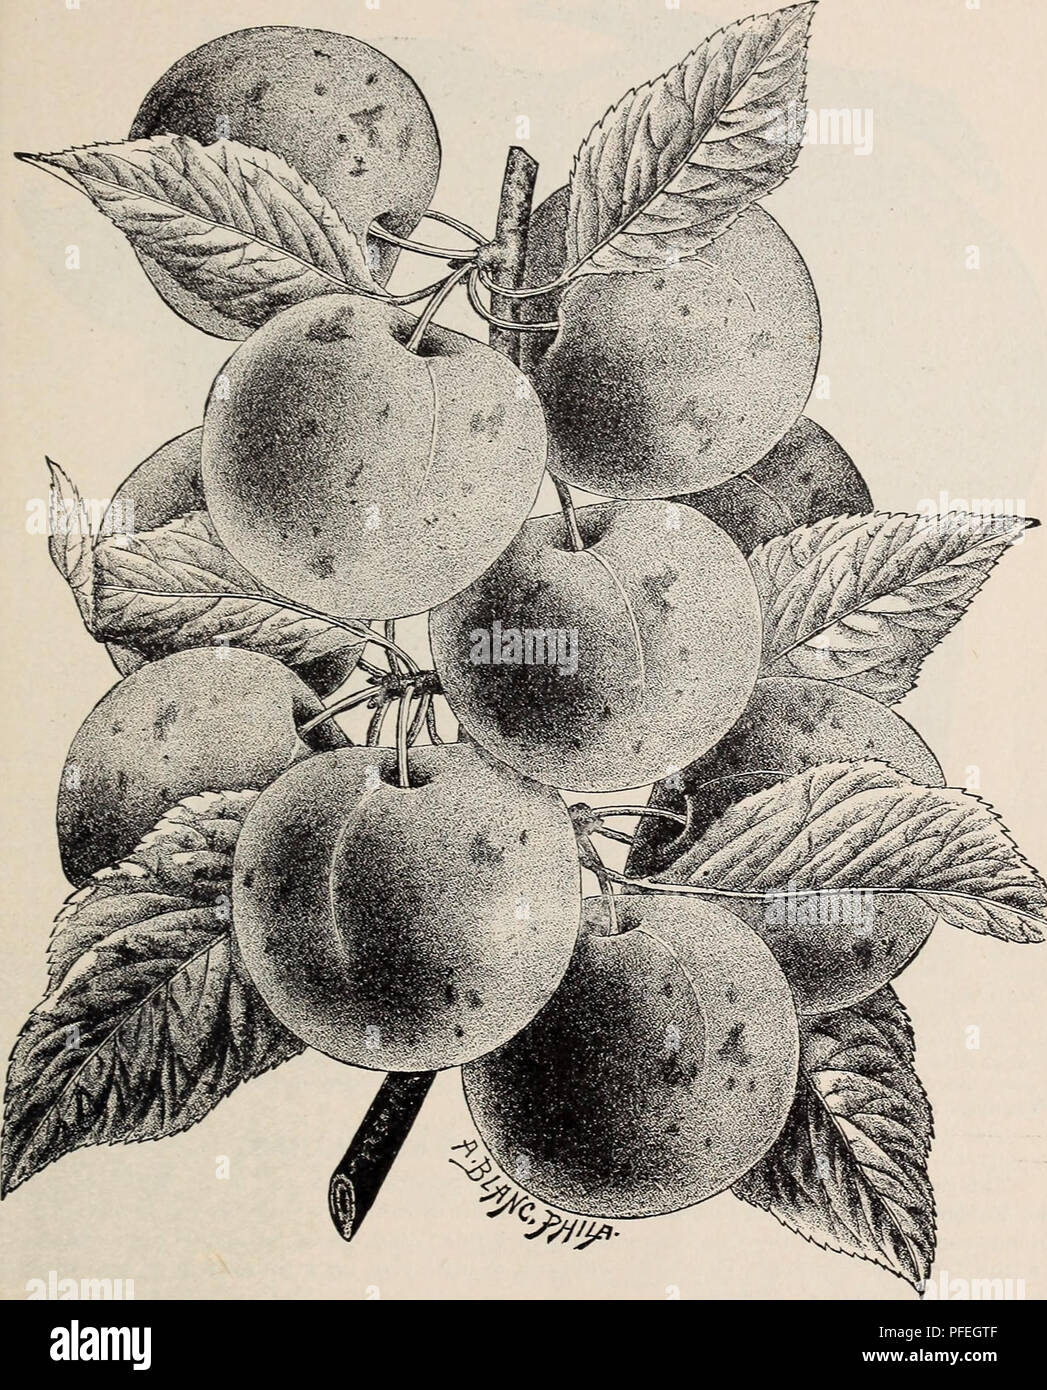 . Descriptive catalogue of fruit and ornamental trees, shrubs, vines and plants, cultivated and for sale. Seed industry and trade Maryland Catalogs; Fruit trees Seeds Catalogs; Climbing plants Seeds Catalogs; Plants, Ornamental Catalogs. Descriptive Catalogue. 45. Wild Goose Plum. ; Washington. {Bolmar's.) Very large ; skin j-ellowish green, often with a pale red blush ; flesh yellowish, firm, very sweet and luscious, separating freely from the stone. There is perhaps, not another plum that stands so high in general estimation in this country as V the Washington. Its great size, its beauty an Stock Photo